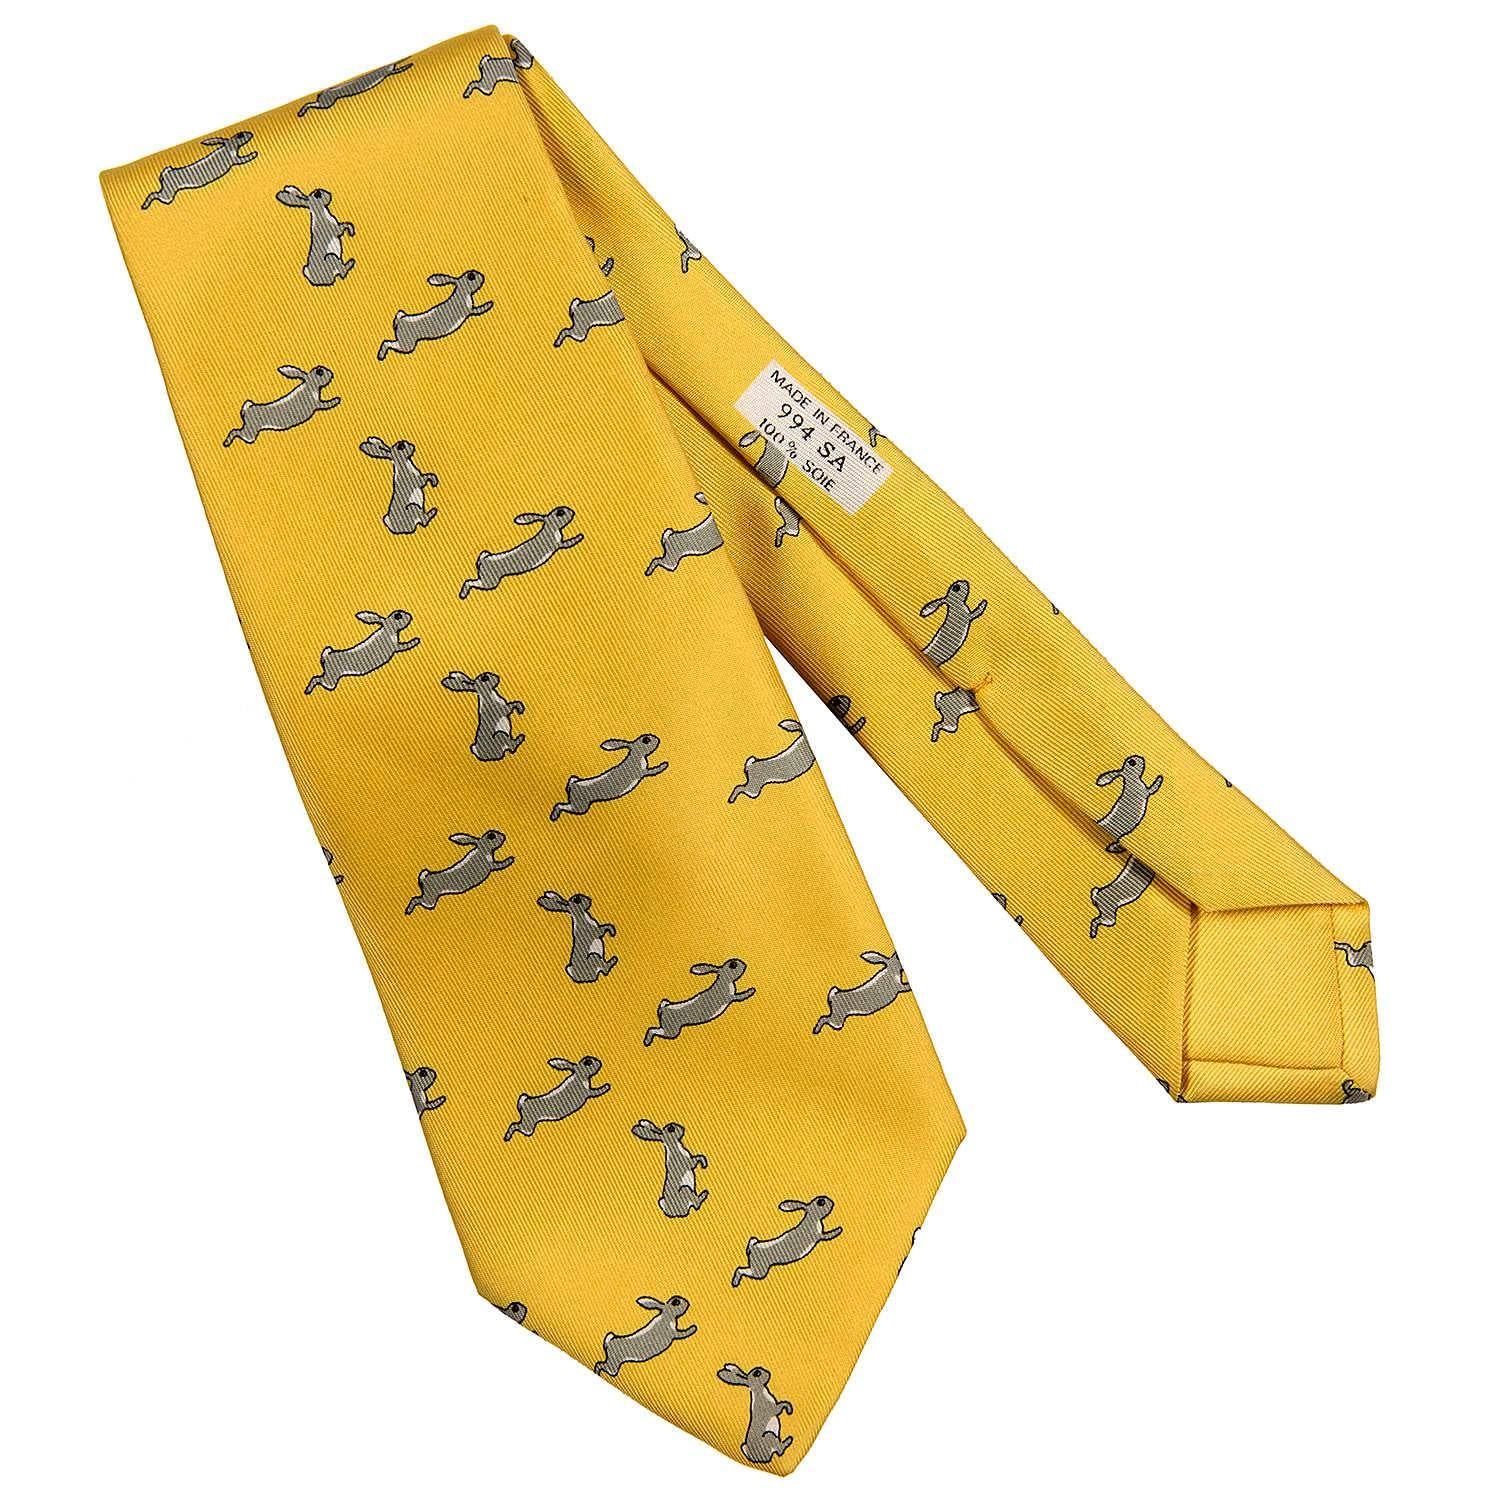 A Delightful Vintage Hermes Silk Tie, 'Rabbits'. In pristine condition it comes with it's original Hermes Box.